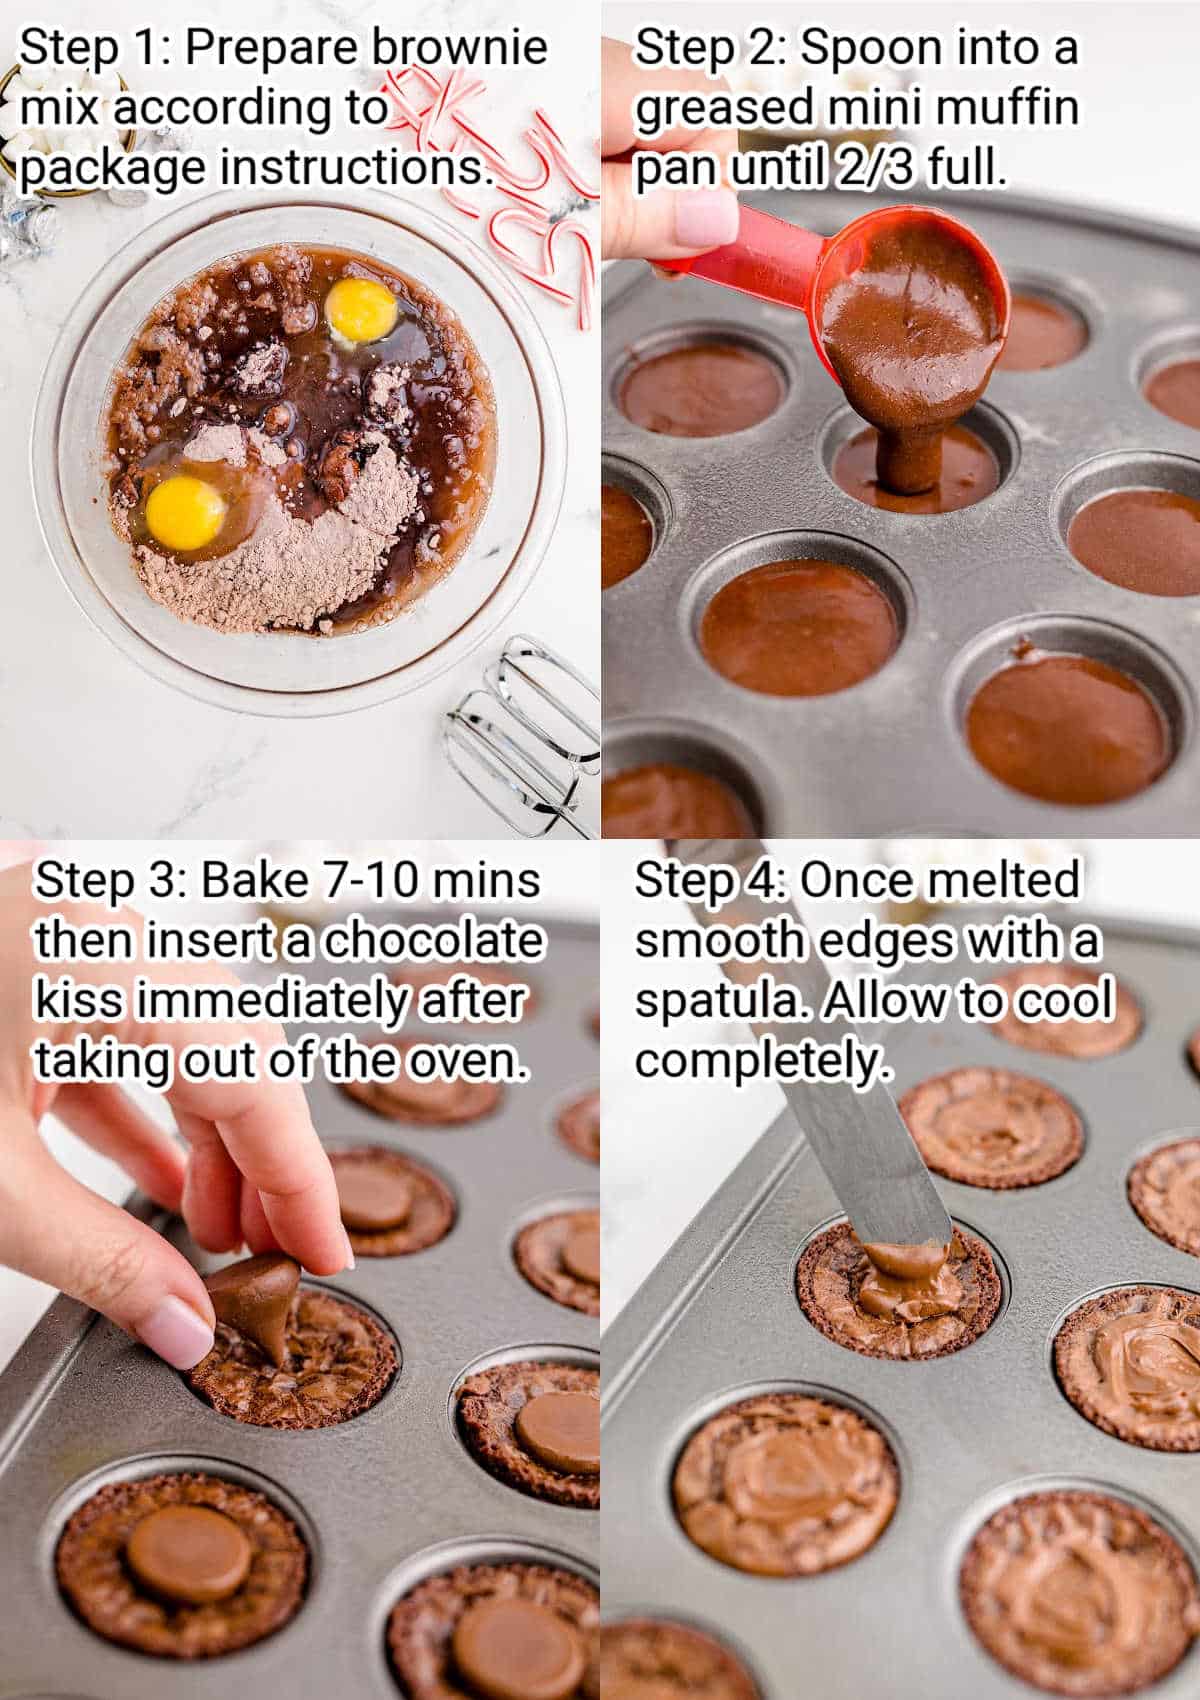 four images showing step by step images on making brownie bites